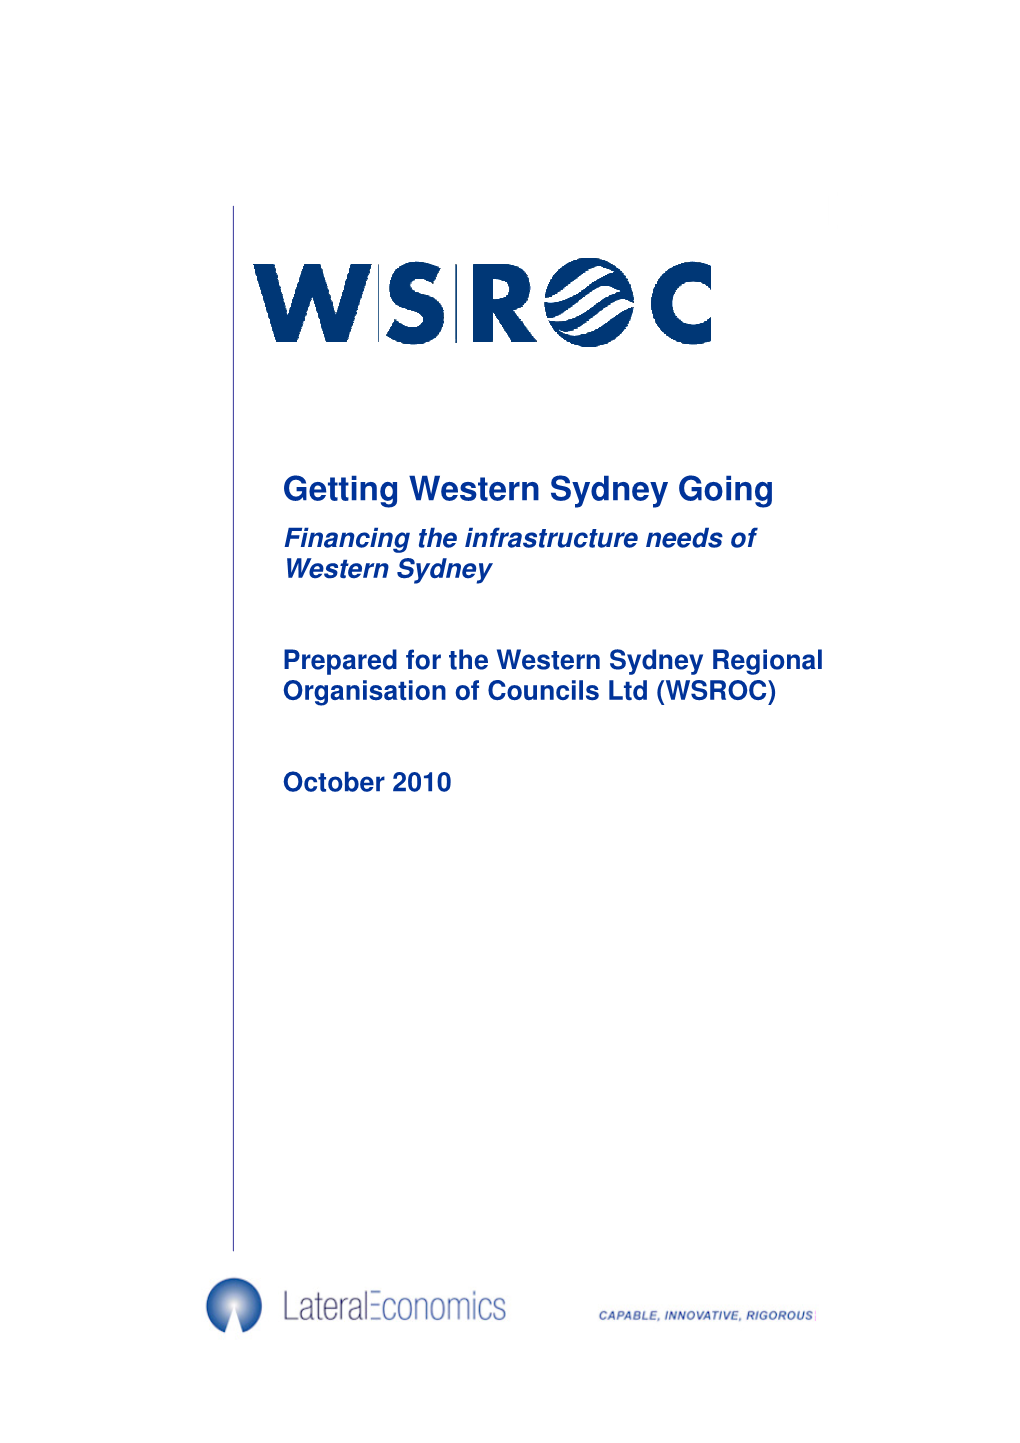 Getting Western Sydney Going Financing the Infrastructure Needs of Western Sydney